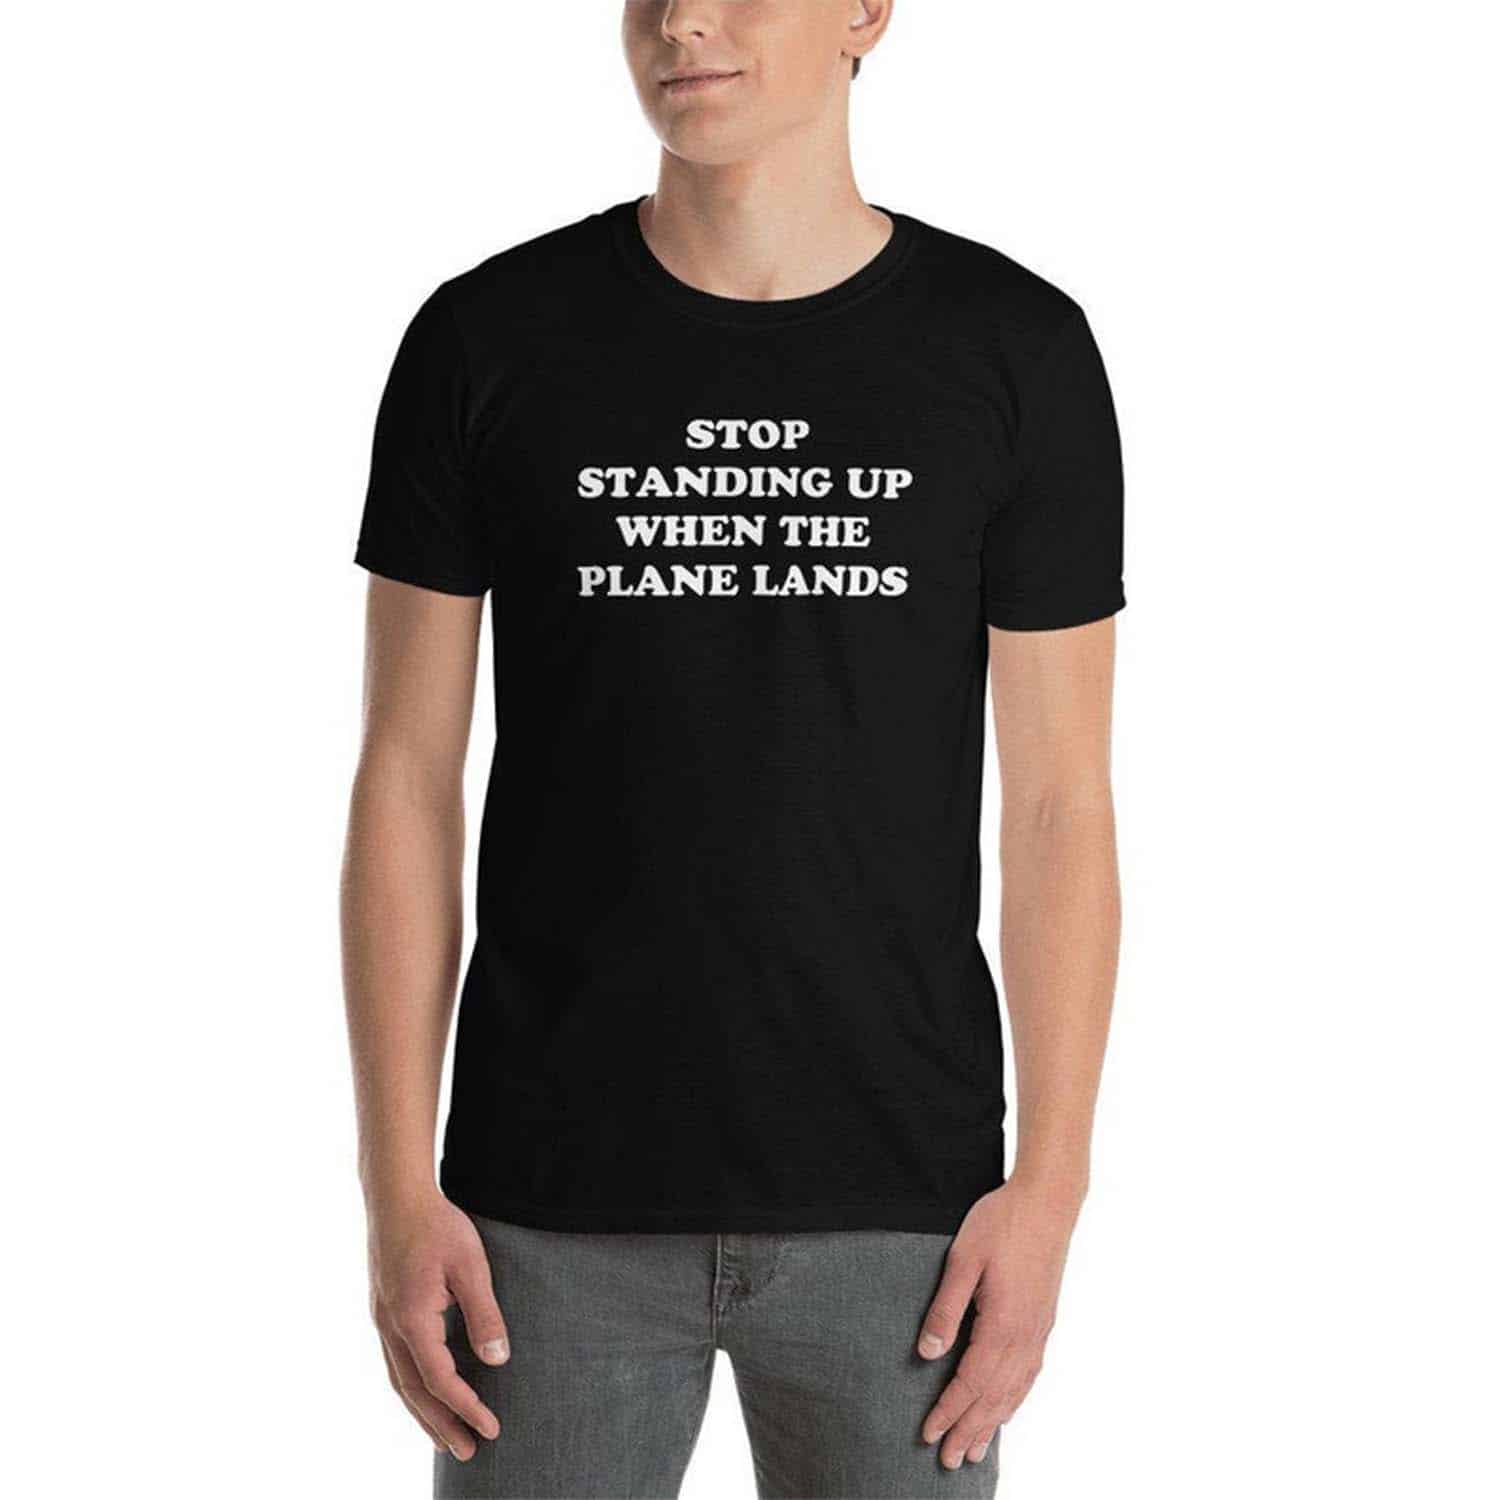 Stop Standing Up When The Plane Lands Shirt